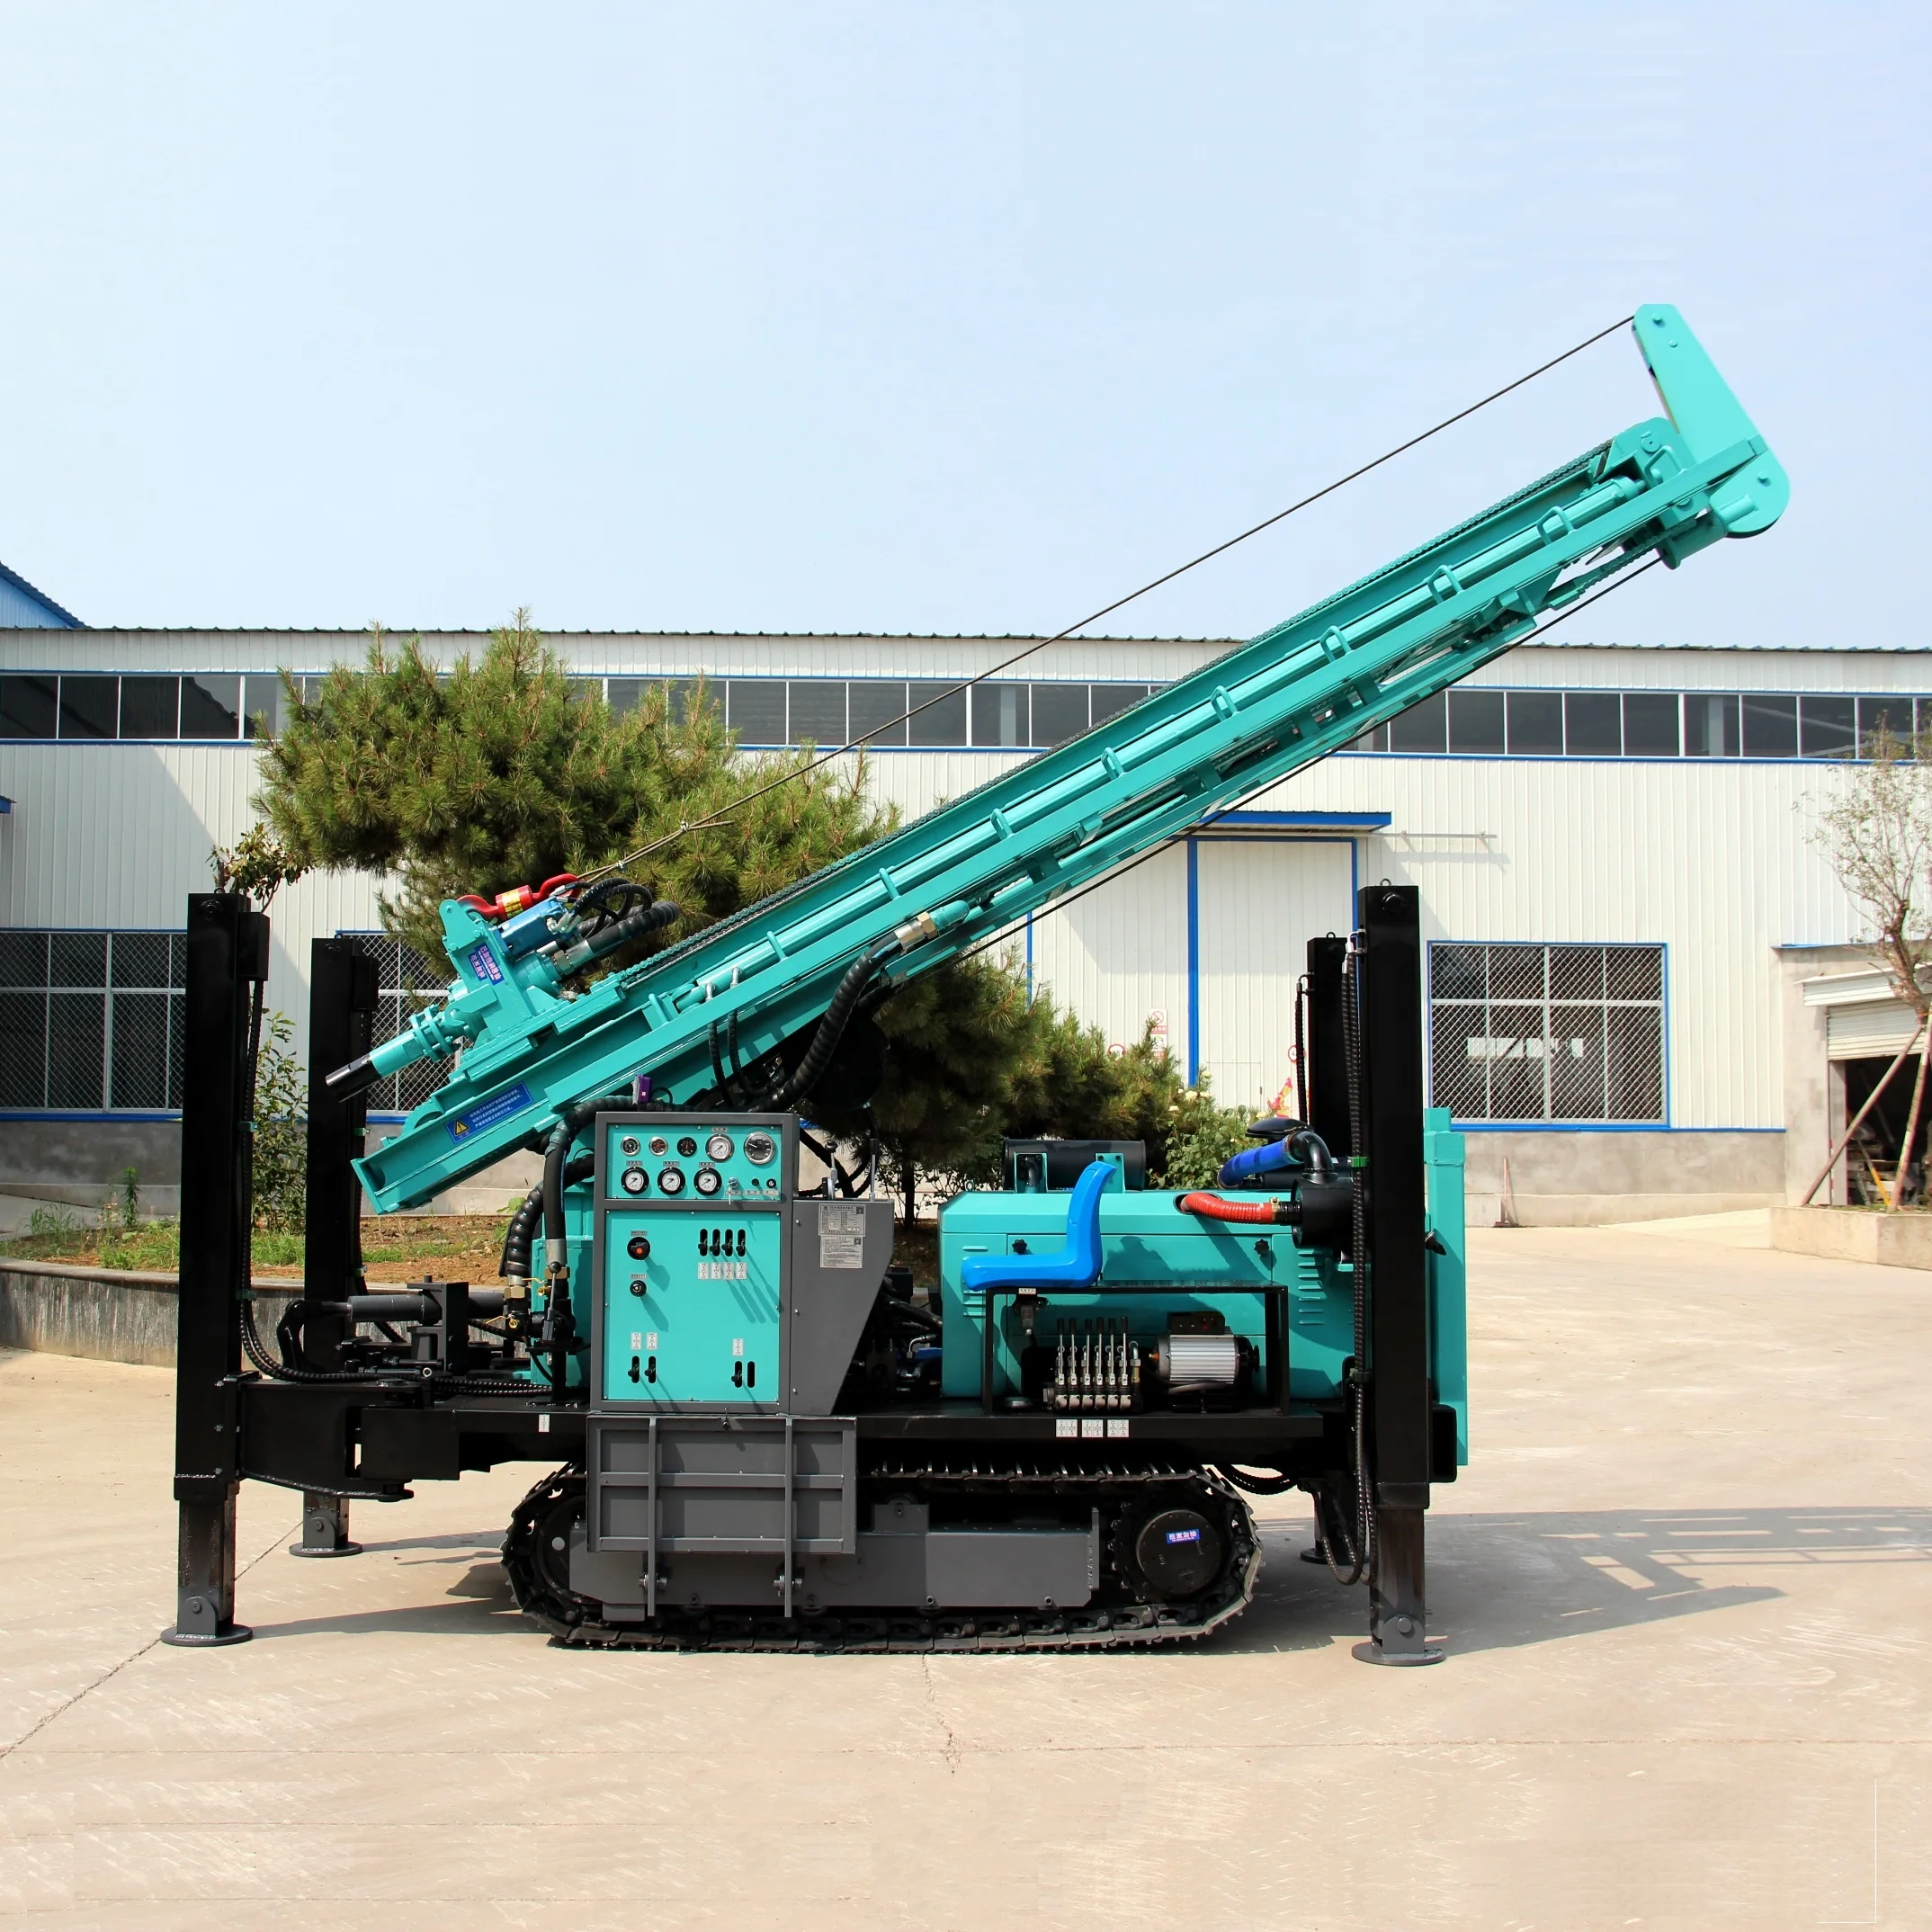 
 NEW MODEL KW280 UP TO 280 METERS/250 METERS WATER WELL BOREHOLE DRILLING RIG 250